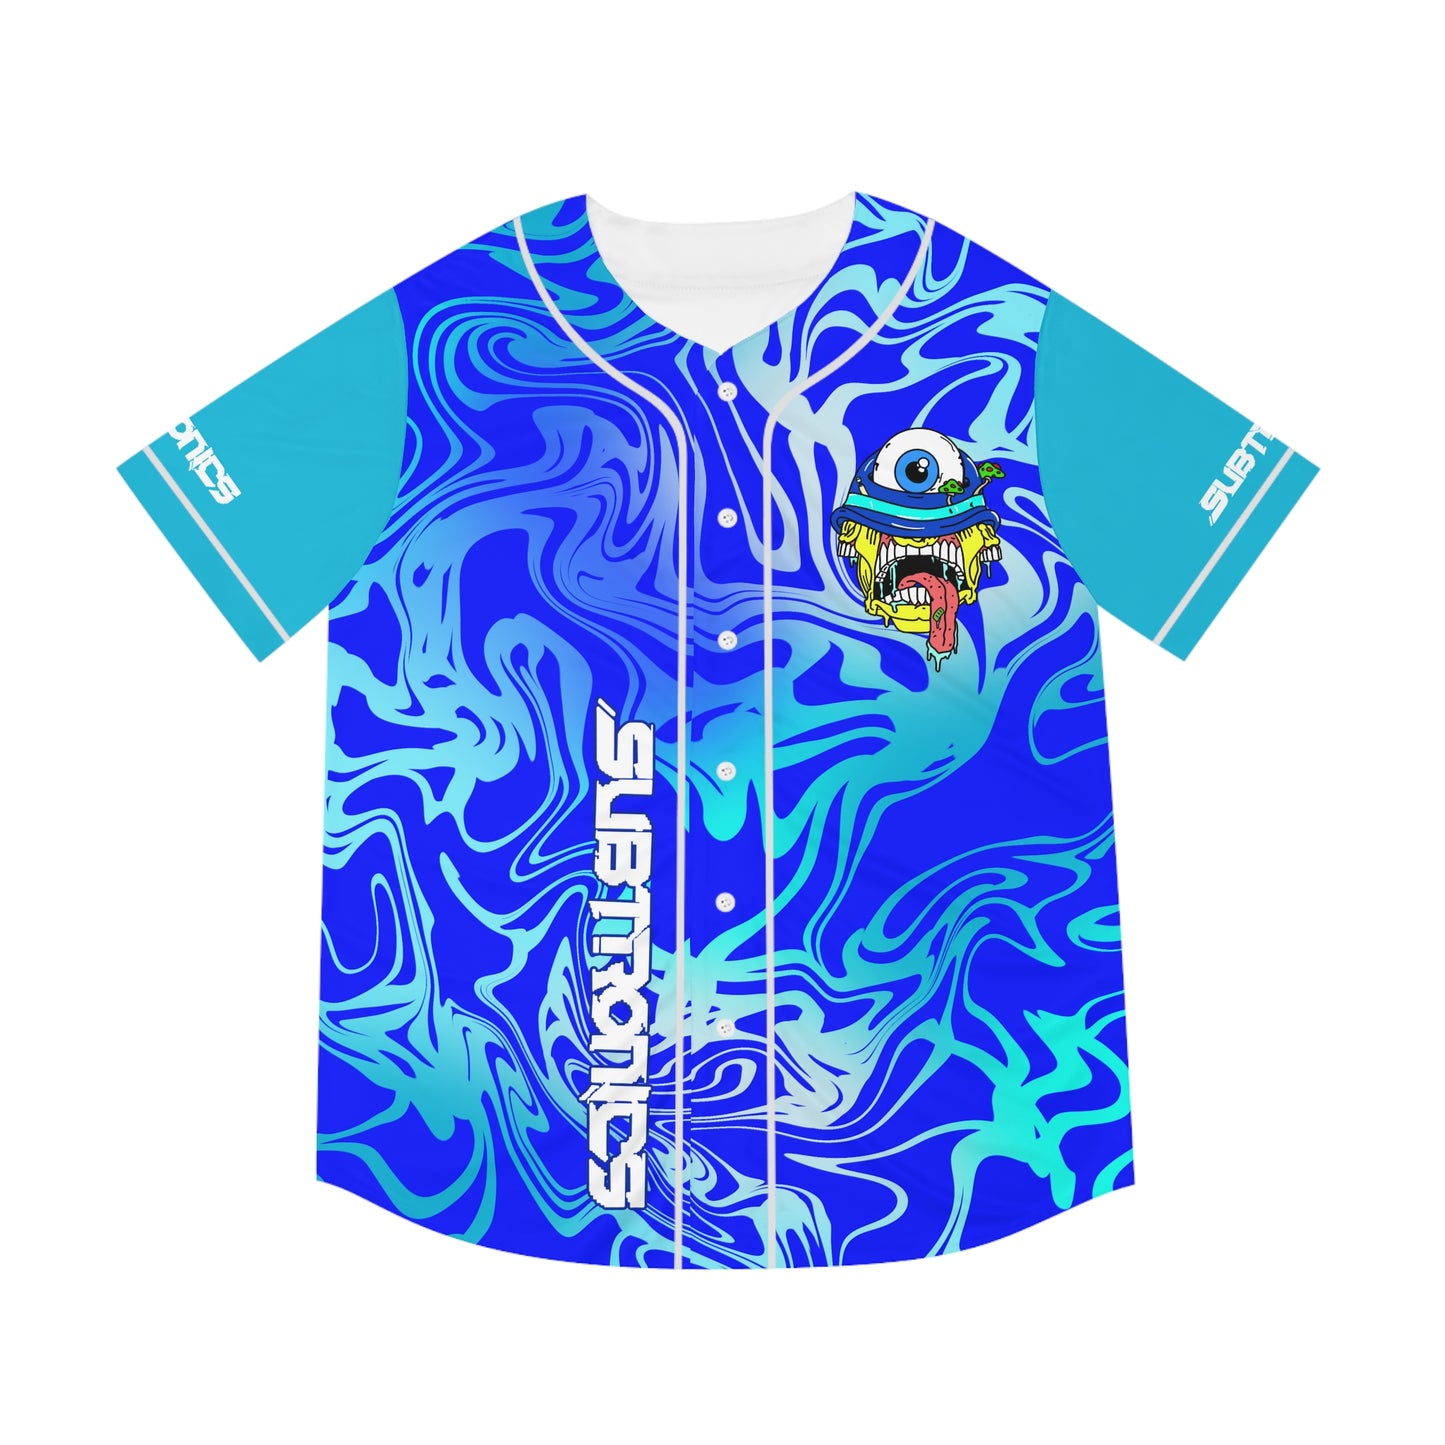 Subtronics Cyclops Army Jersey (Blue, Front Name)